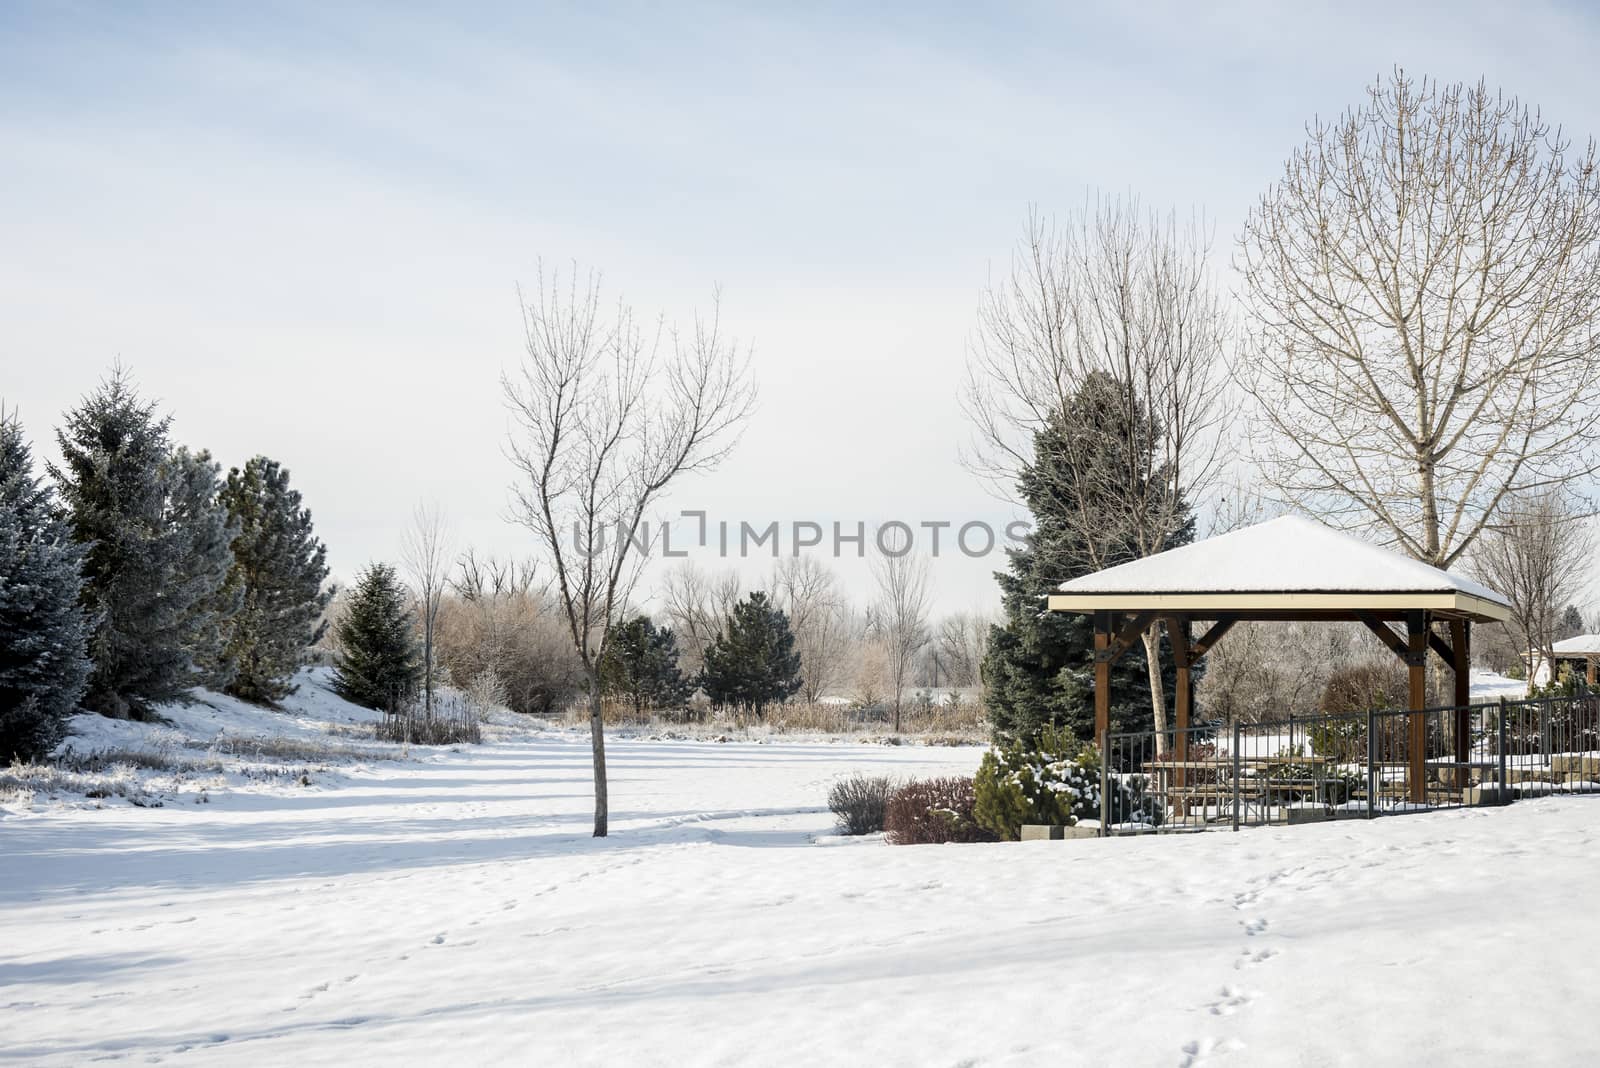 Snow-covered park with trees and gazebo in winter by Njean